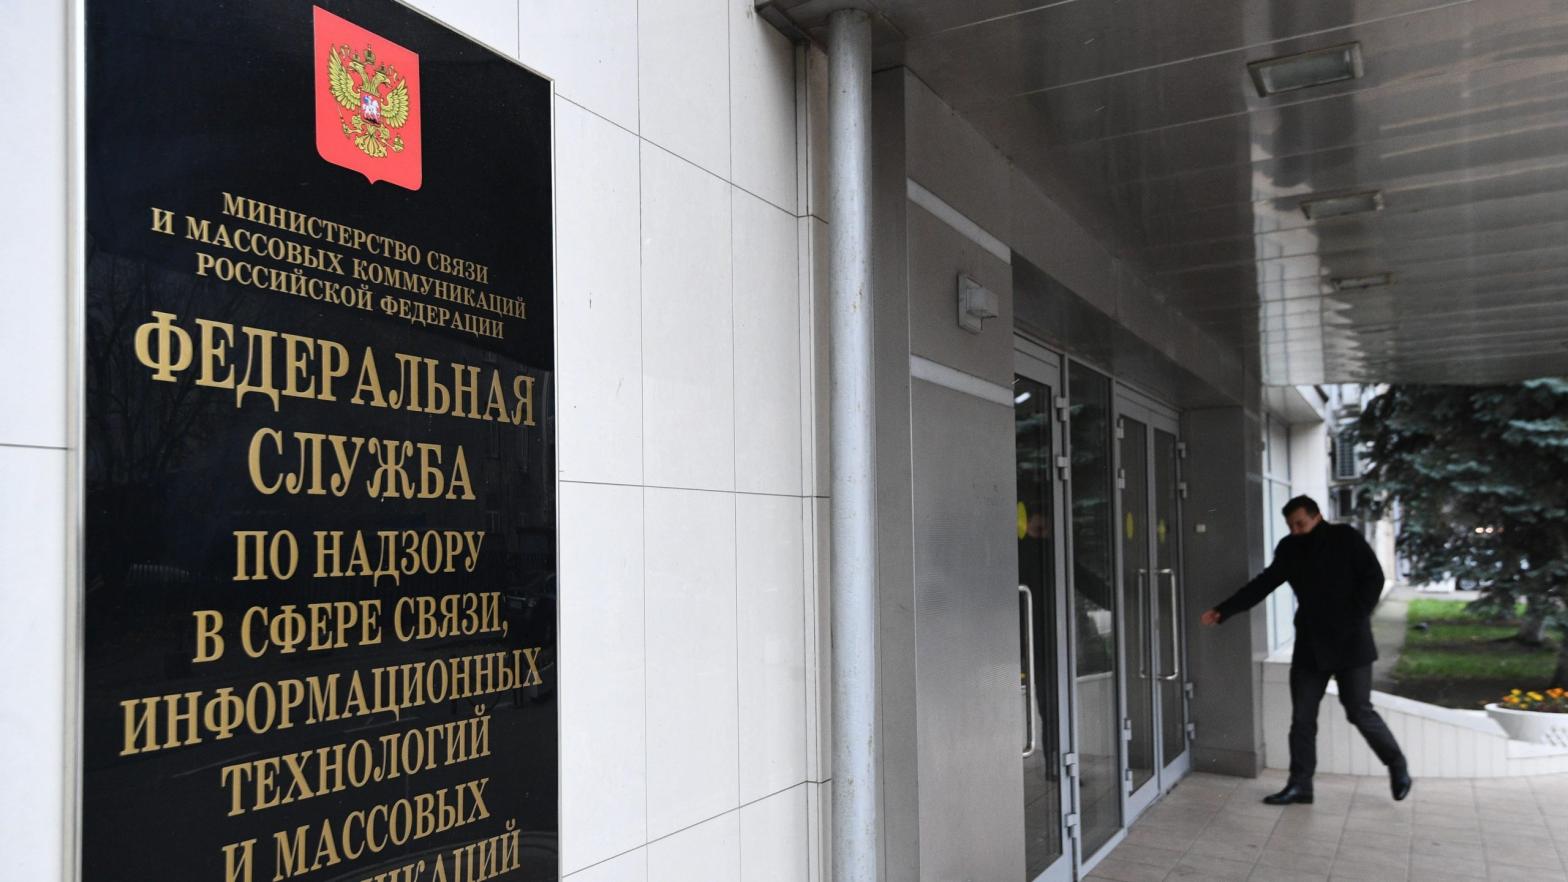 A sign near the front doors of the Federal Service for Supervision of Communications, Information Technology and Mass Media (Roskomnadzor) building in Moscow. (Photo: Ramil Sitdikov / Sputnik via AP, AP)